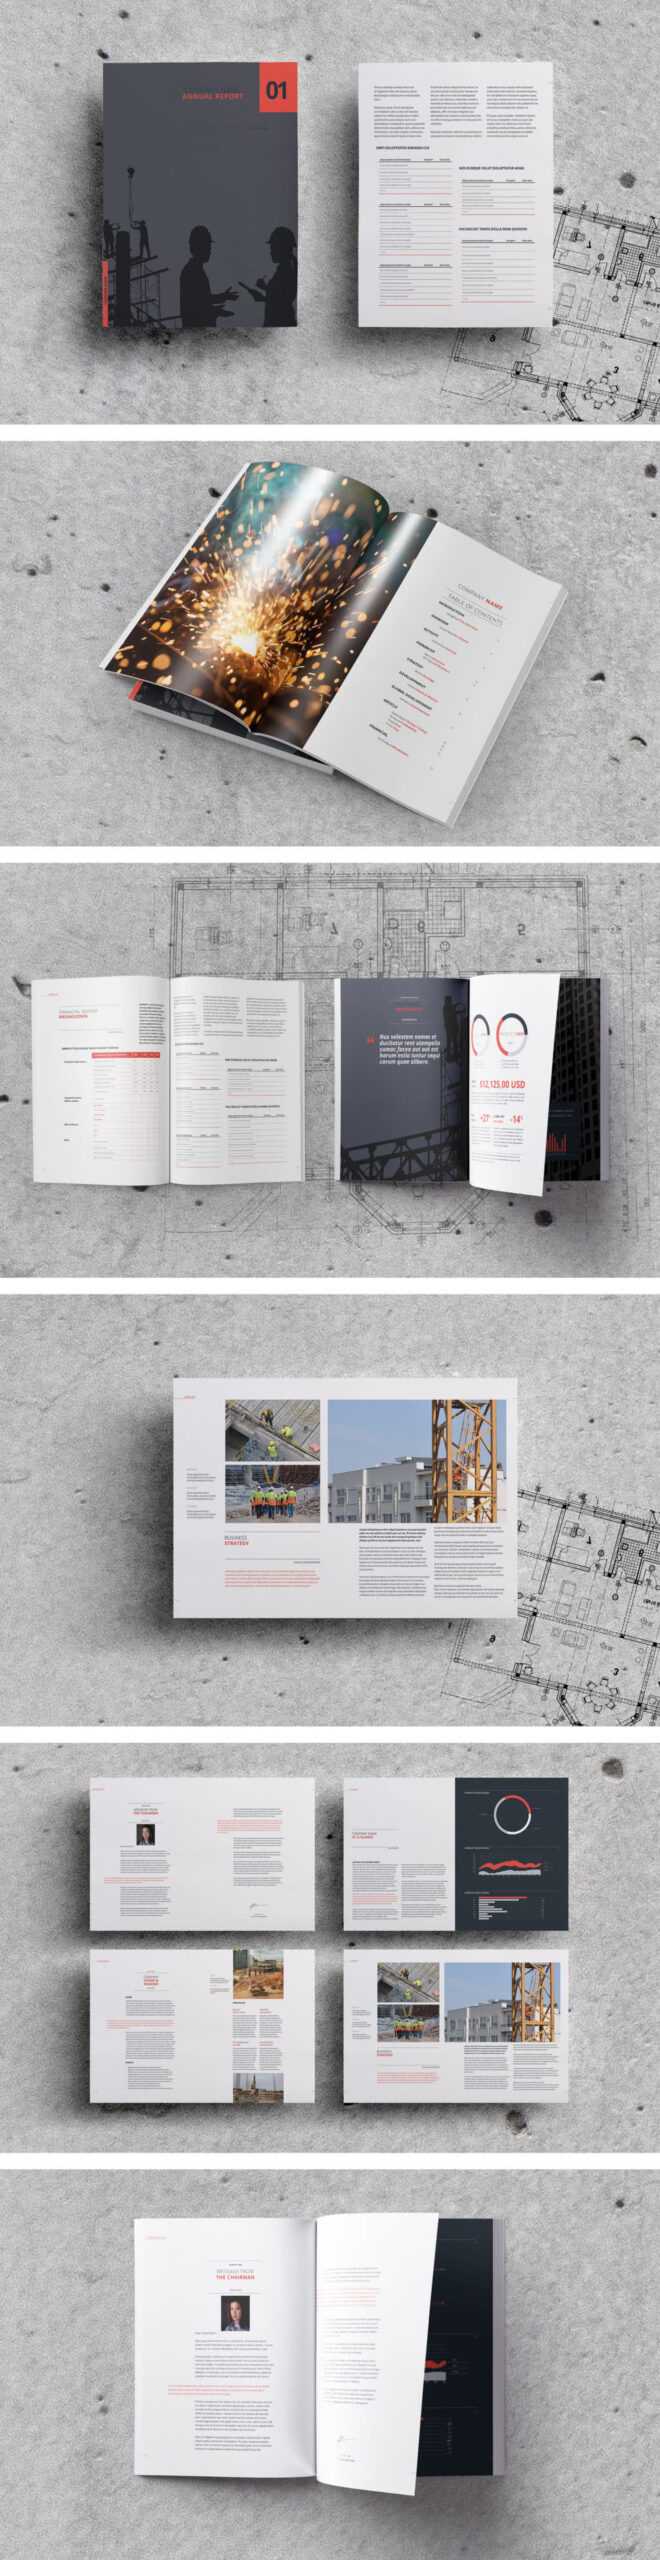 038 Template Ideas Free Indesign Annual Report Templates Inside Chairman's Annual Report Template